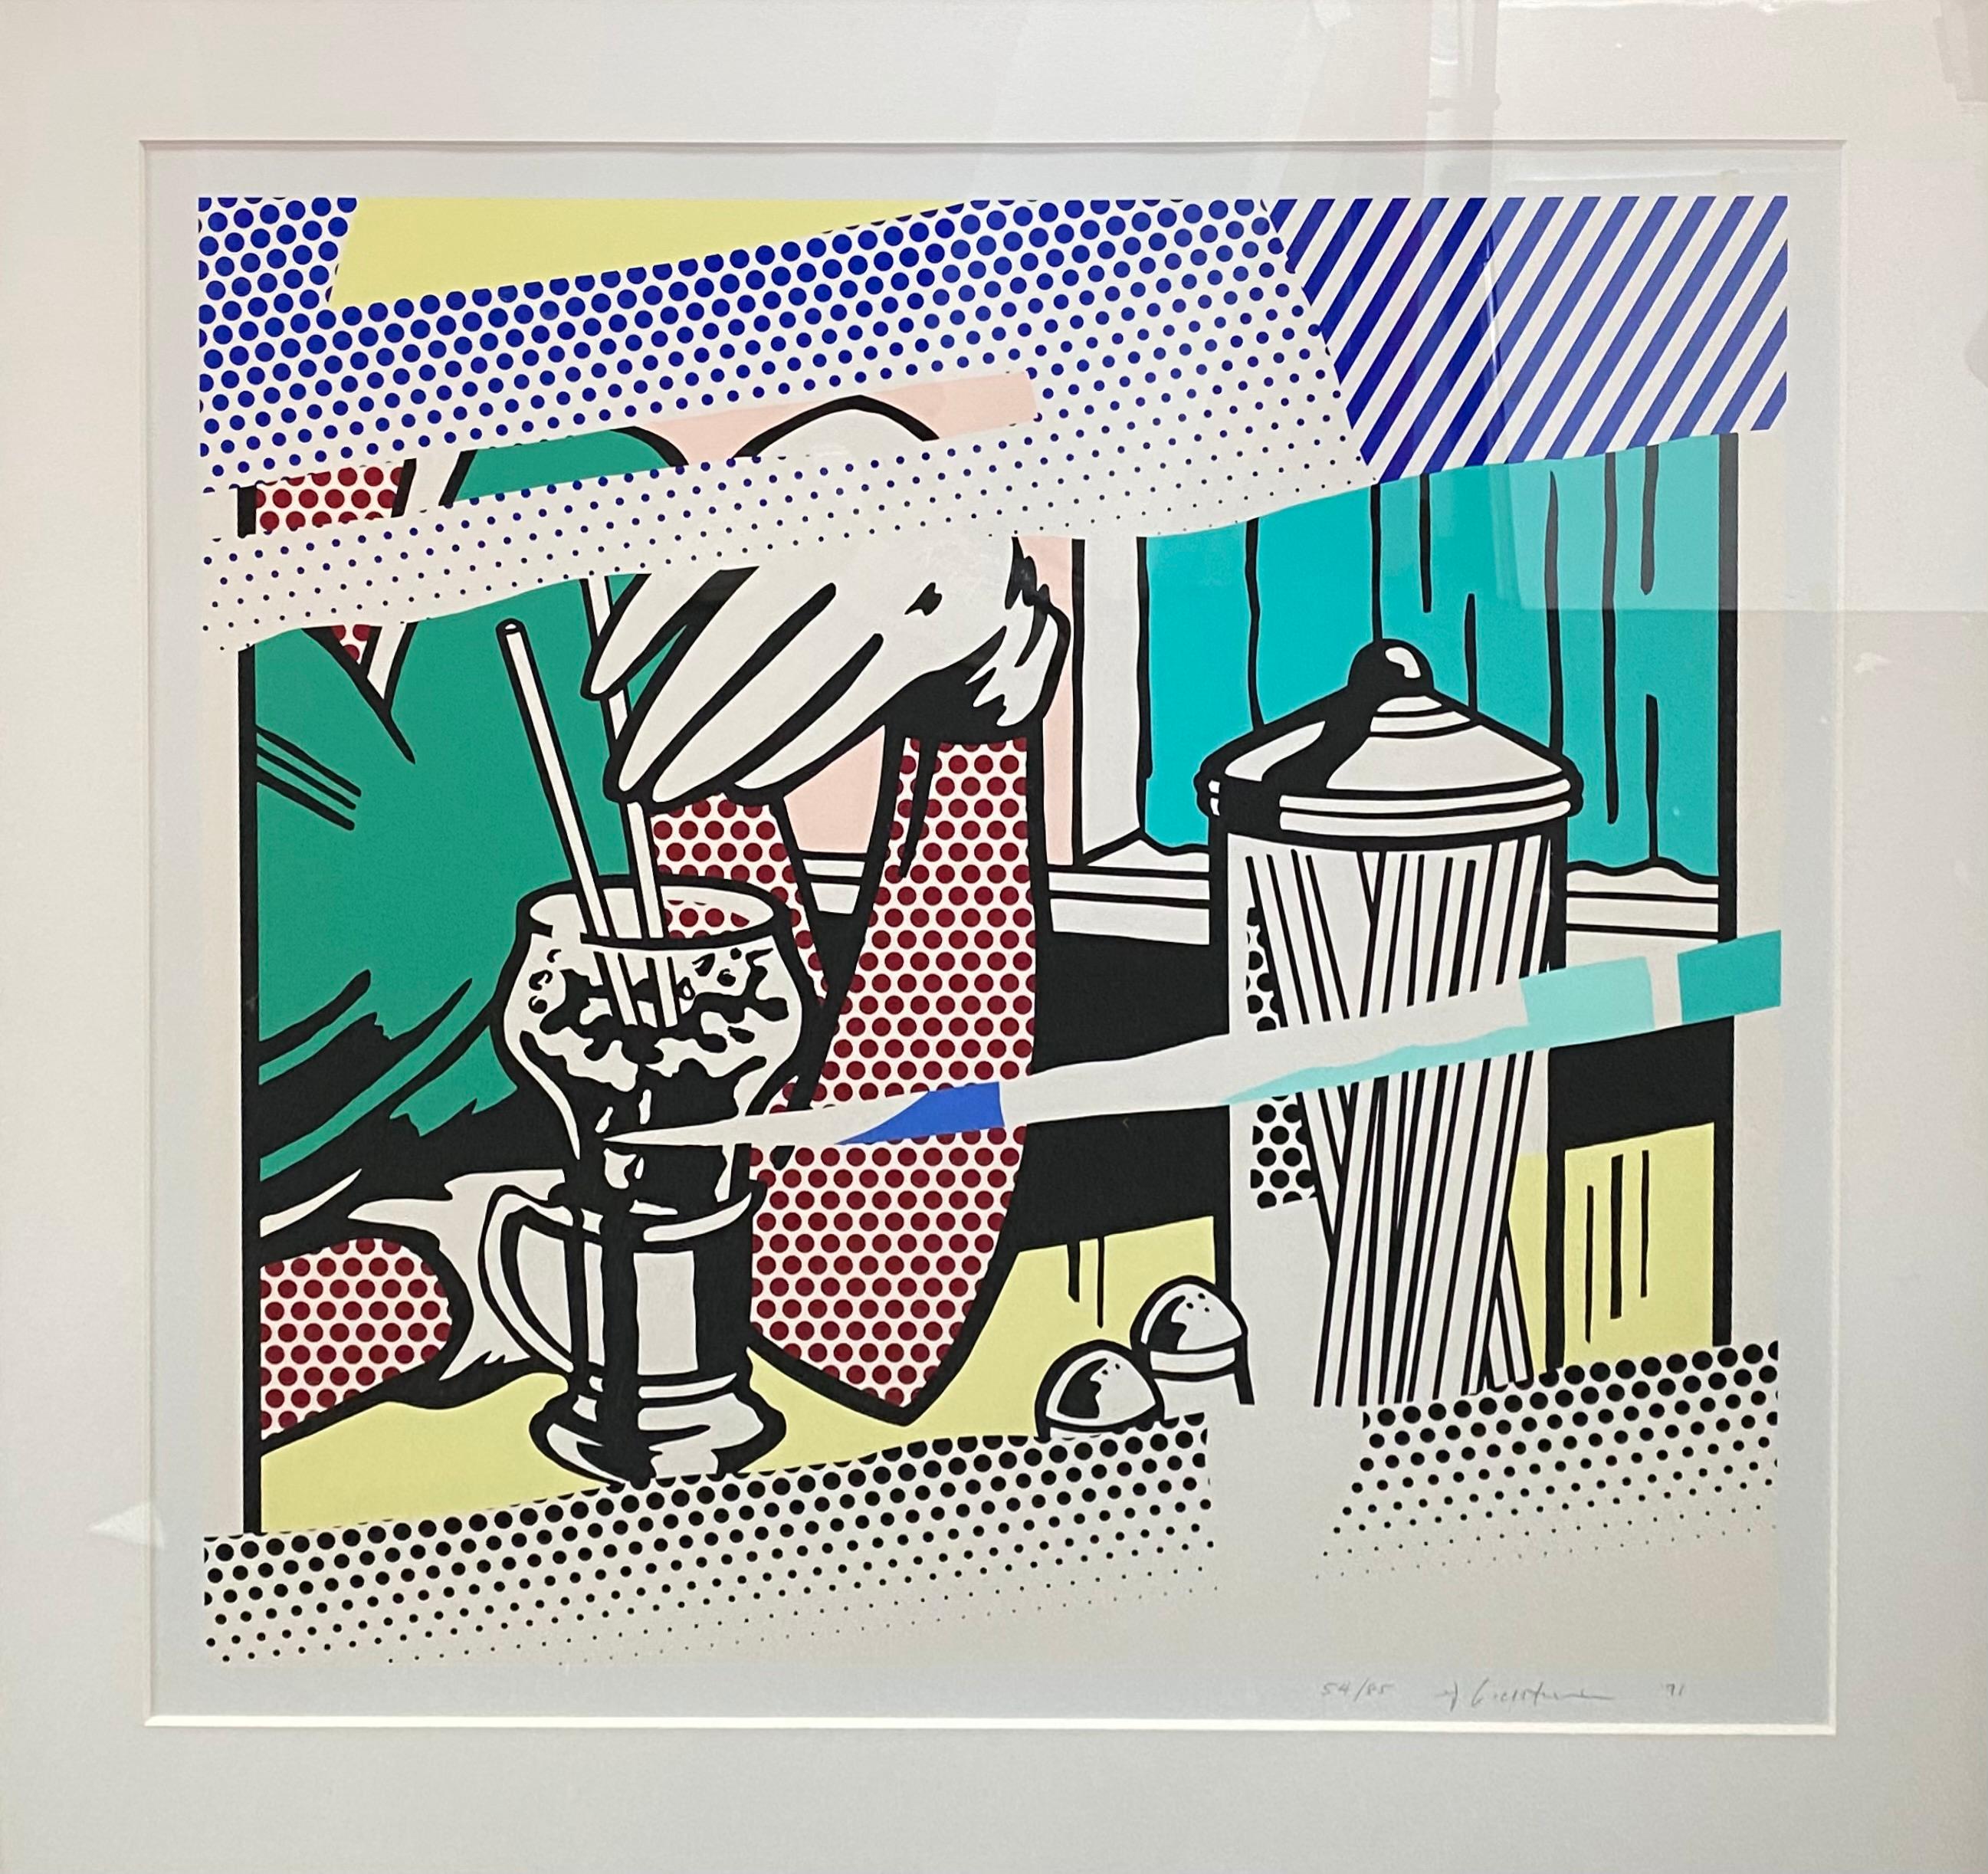 Reflections on Soda Fountain, from The Reflection Series - Print by Roy Lichtenstein